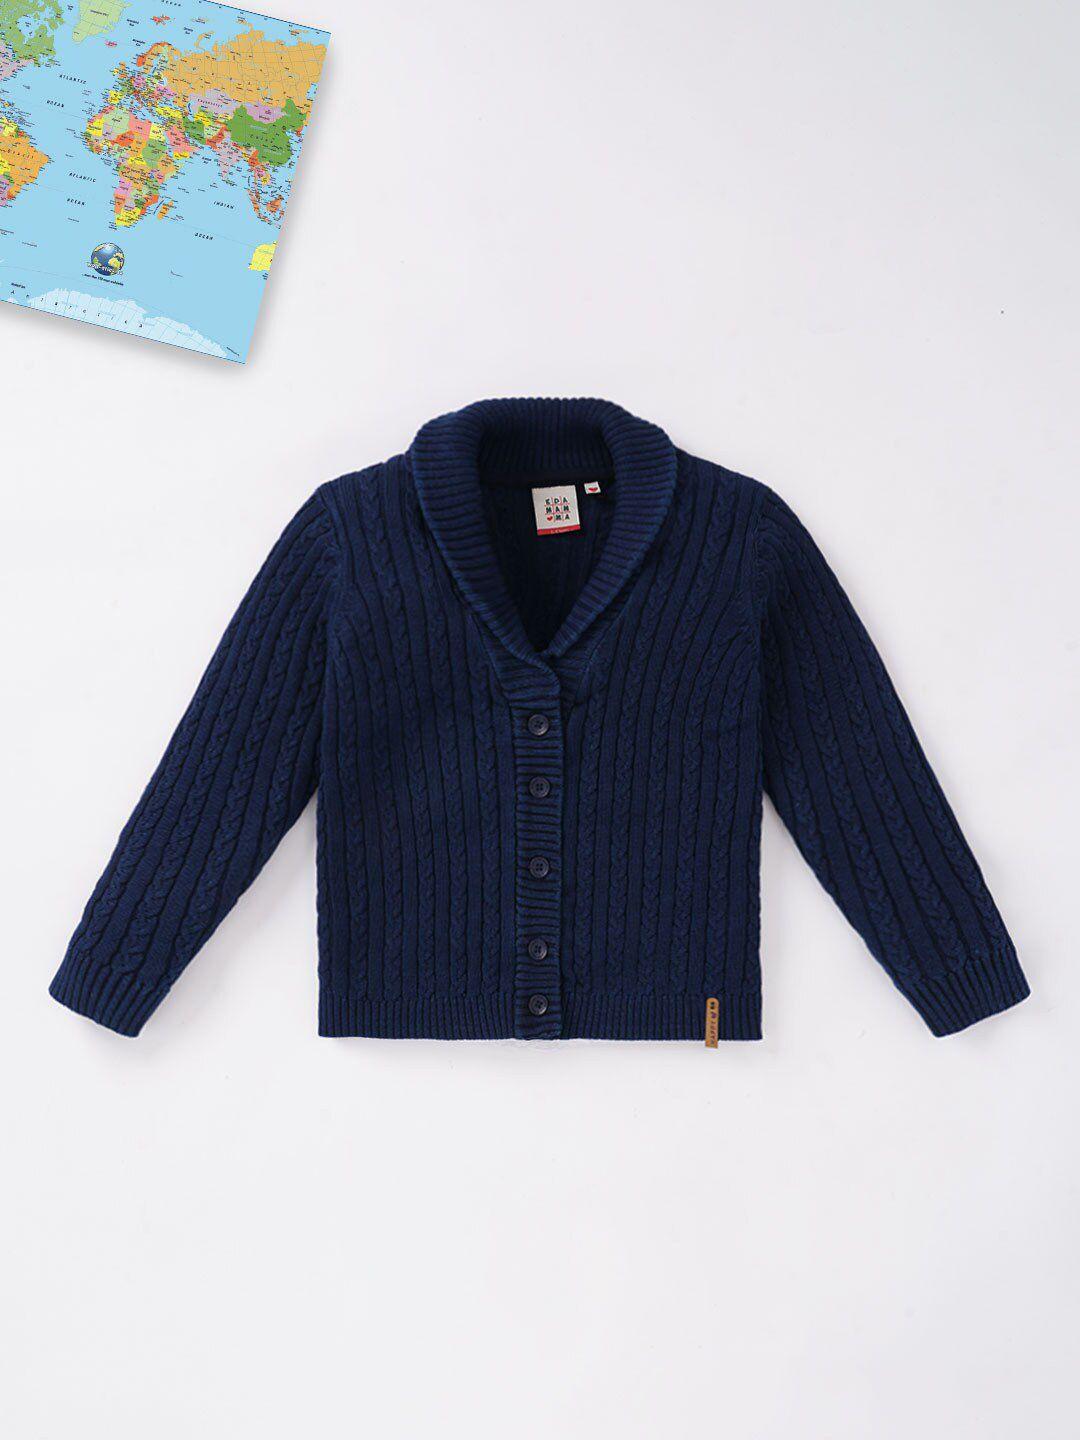 ed-a-mamma-boys-navy-blue-striped-sustainable-cardigan-sweater